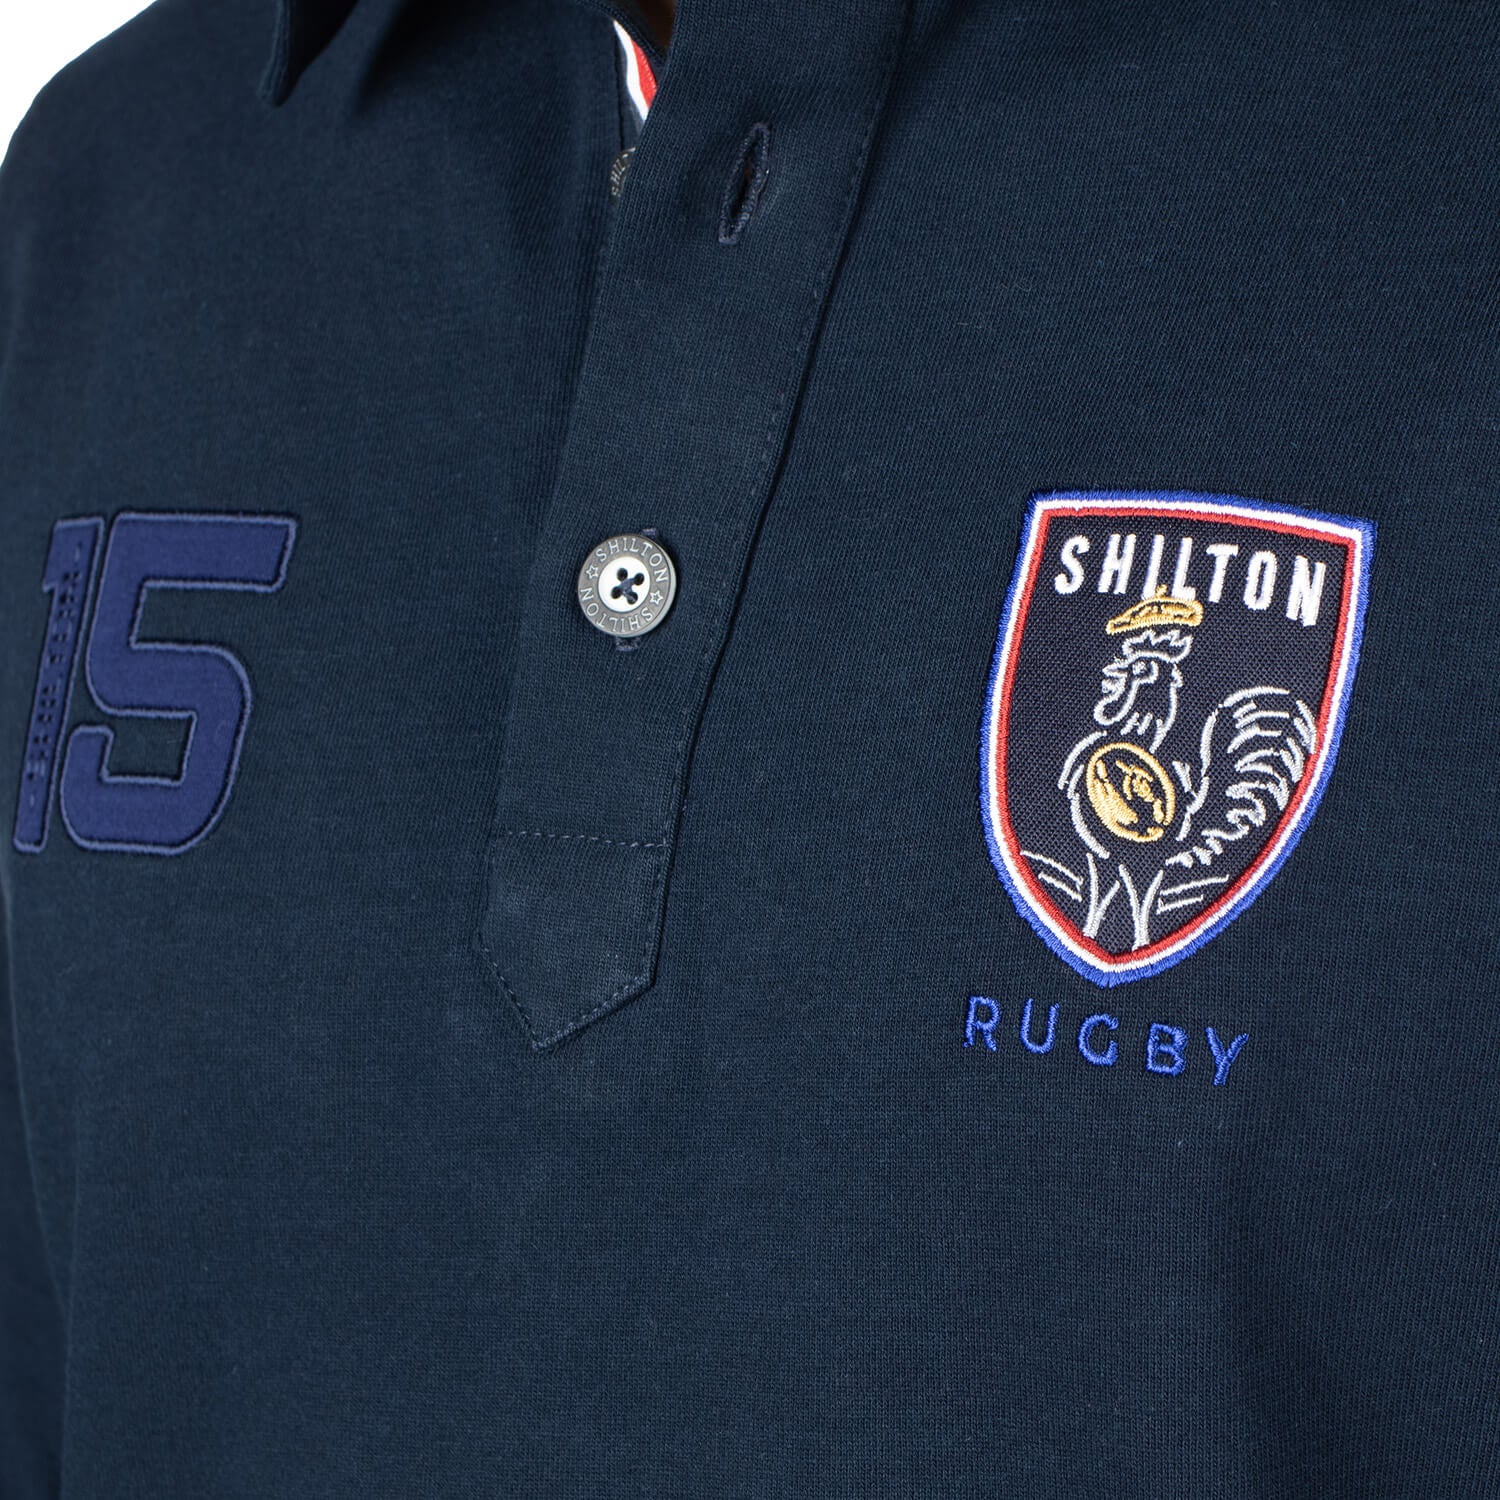 Polo Rugby Fr 15 Navy